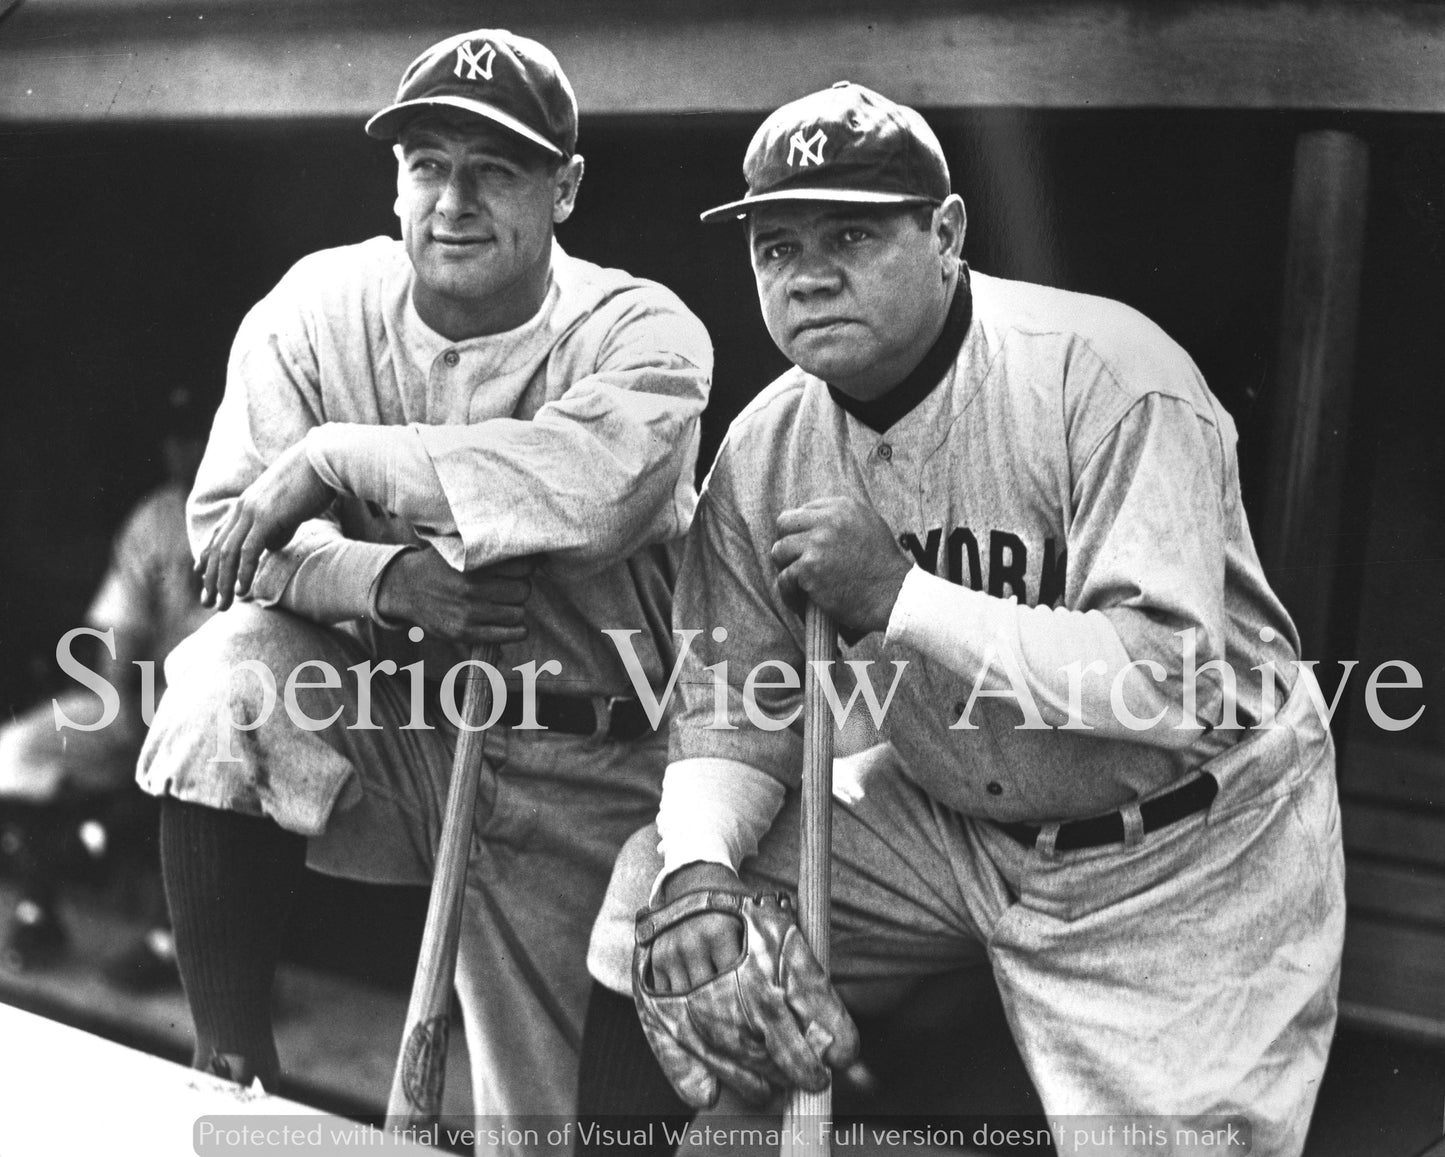 New York Yankees Baseball Lou Gehrig & Babe Ruth Best Image of Gehrig & Ruth